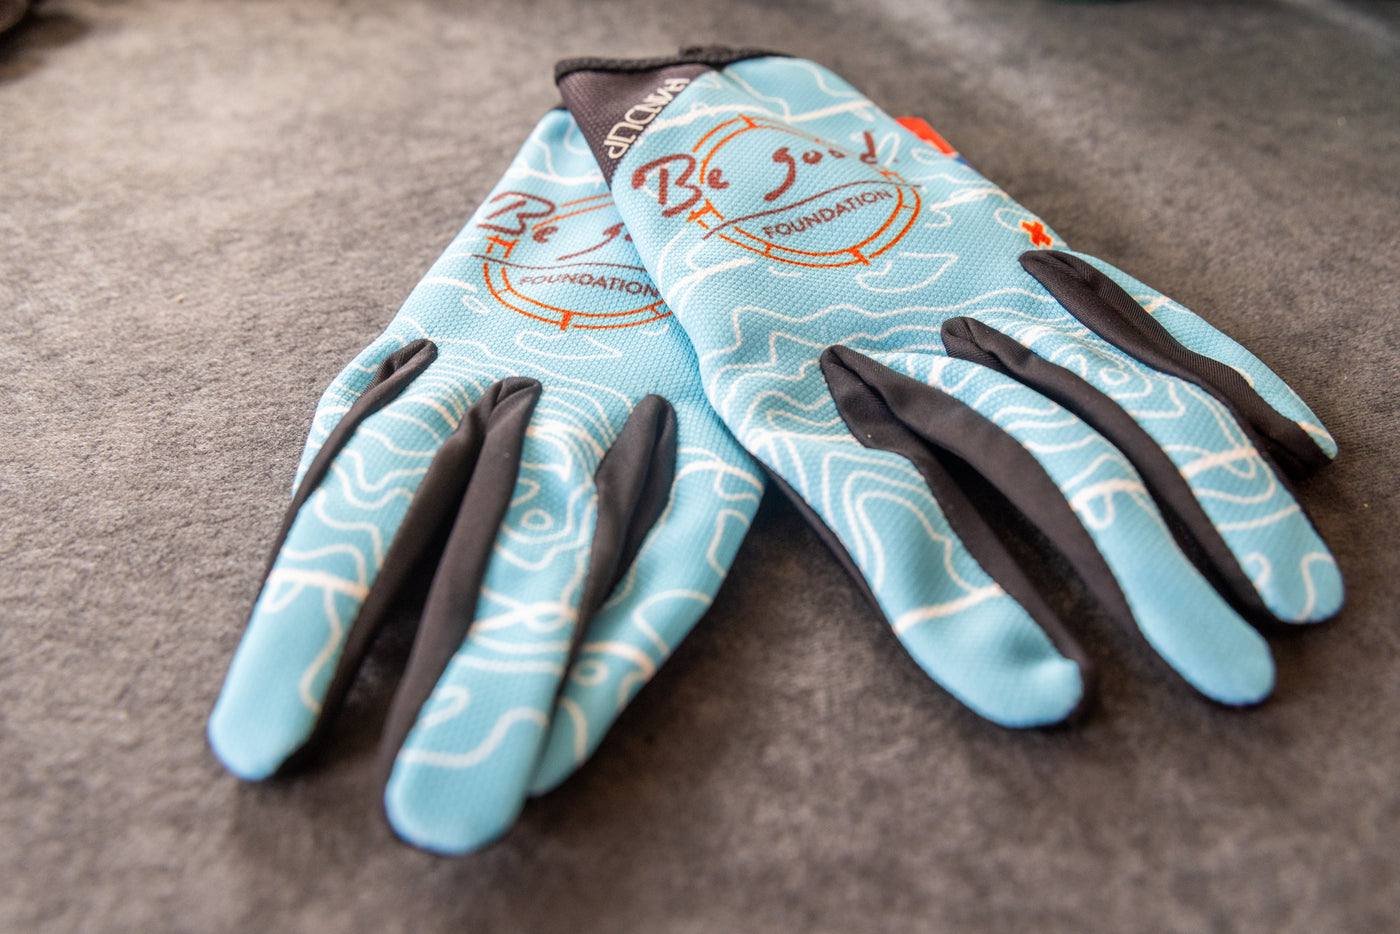 Be Good Gloves by HandUp